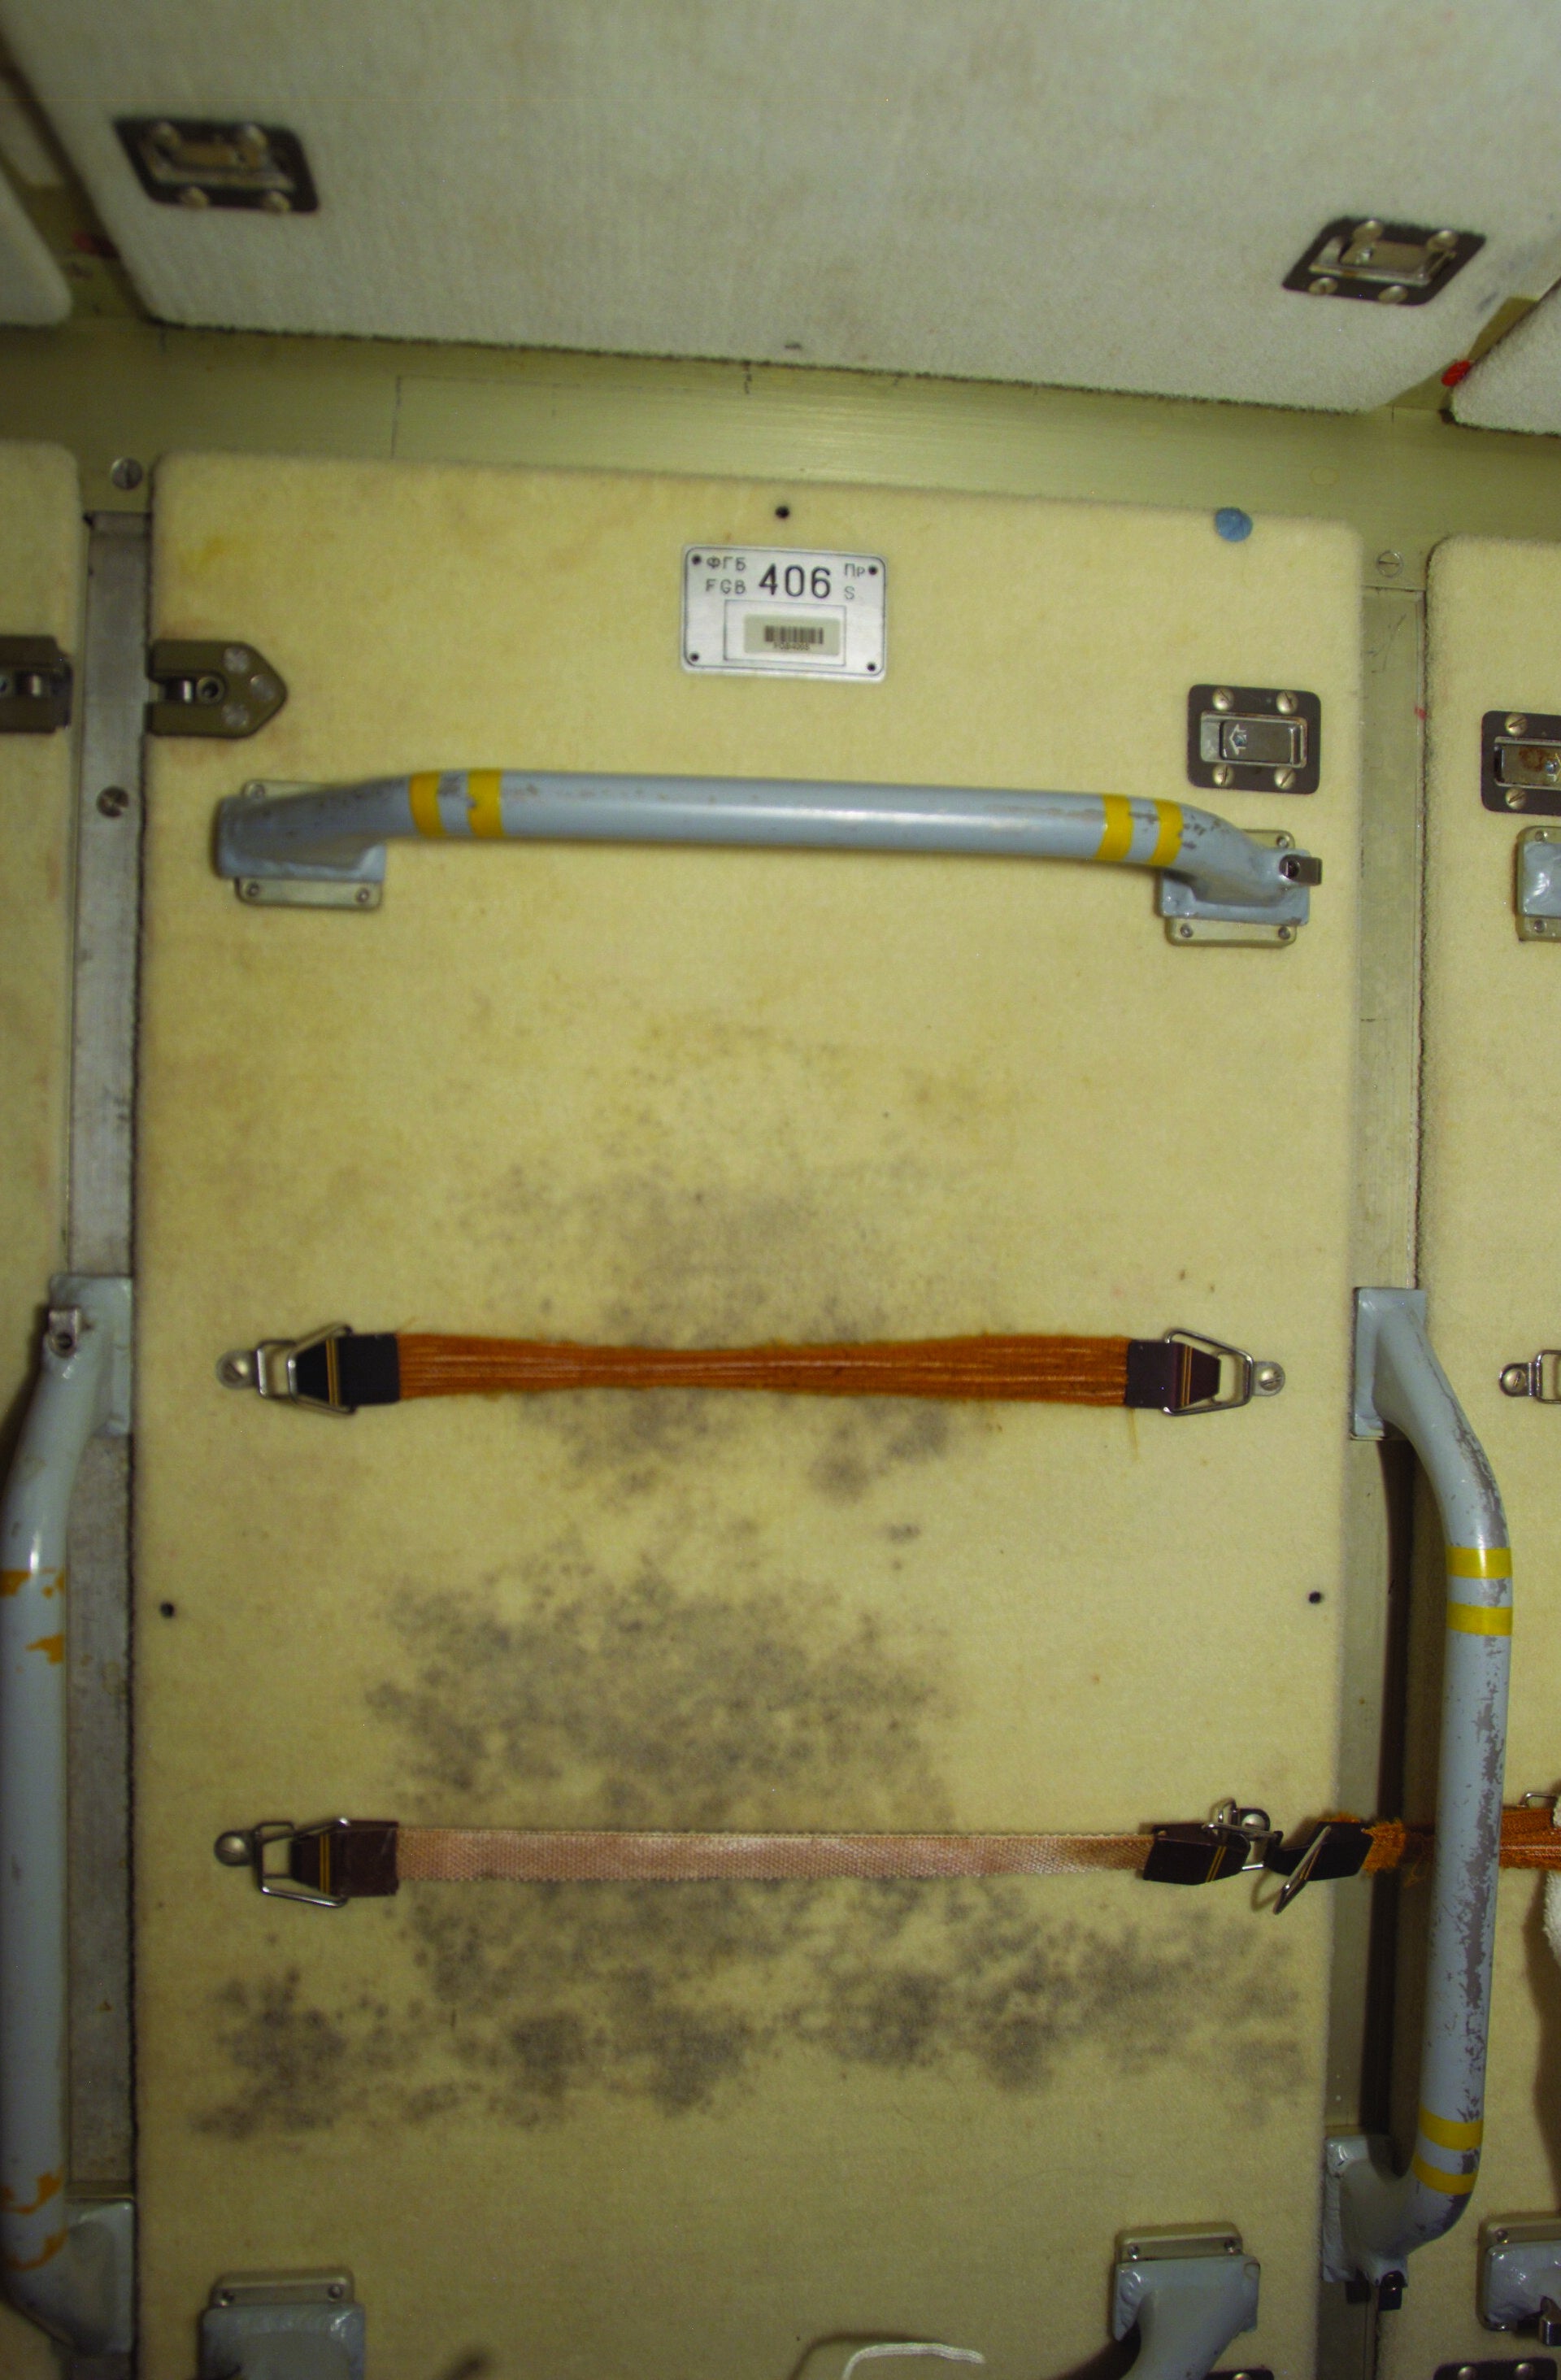 Fungi observed on the ISS, growing on a panel of the Russian Zarya Module where exercise clothes were hung to dry